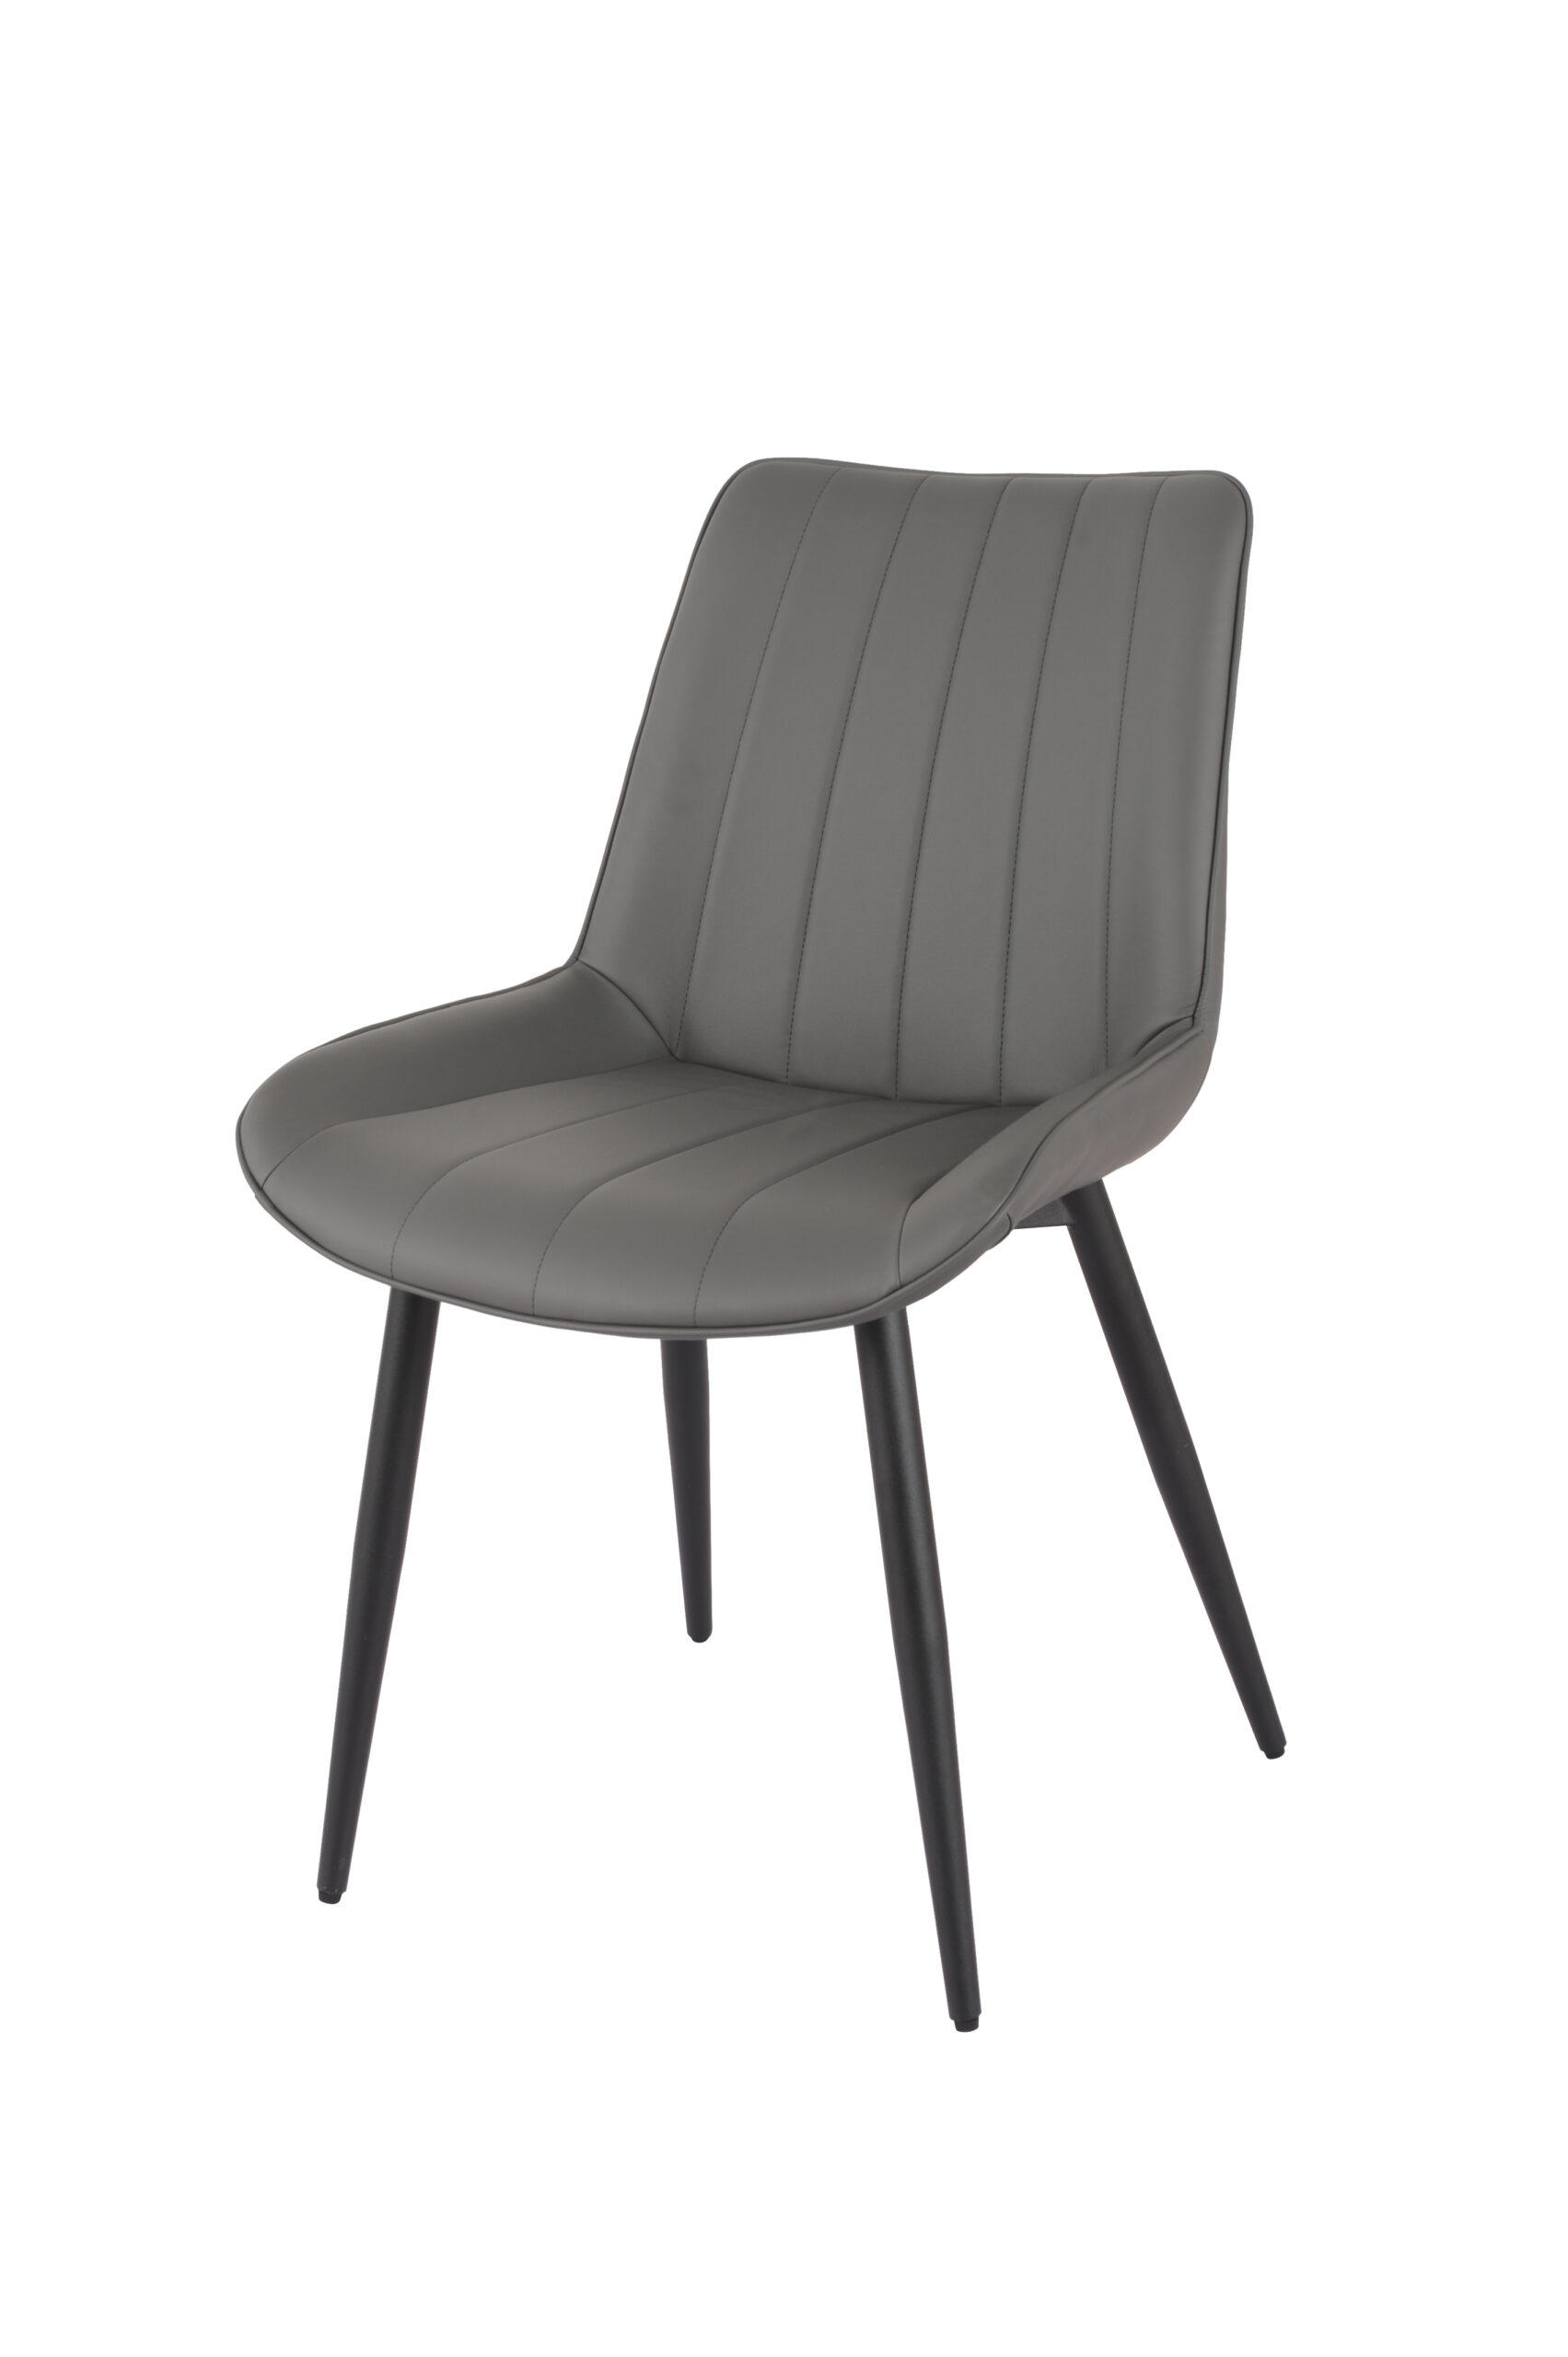 Solo Chairs Valuemark Furniture